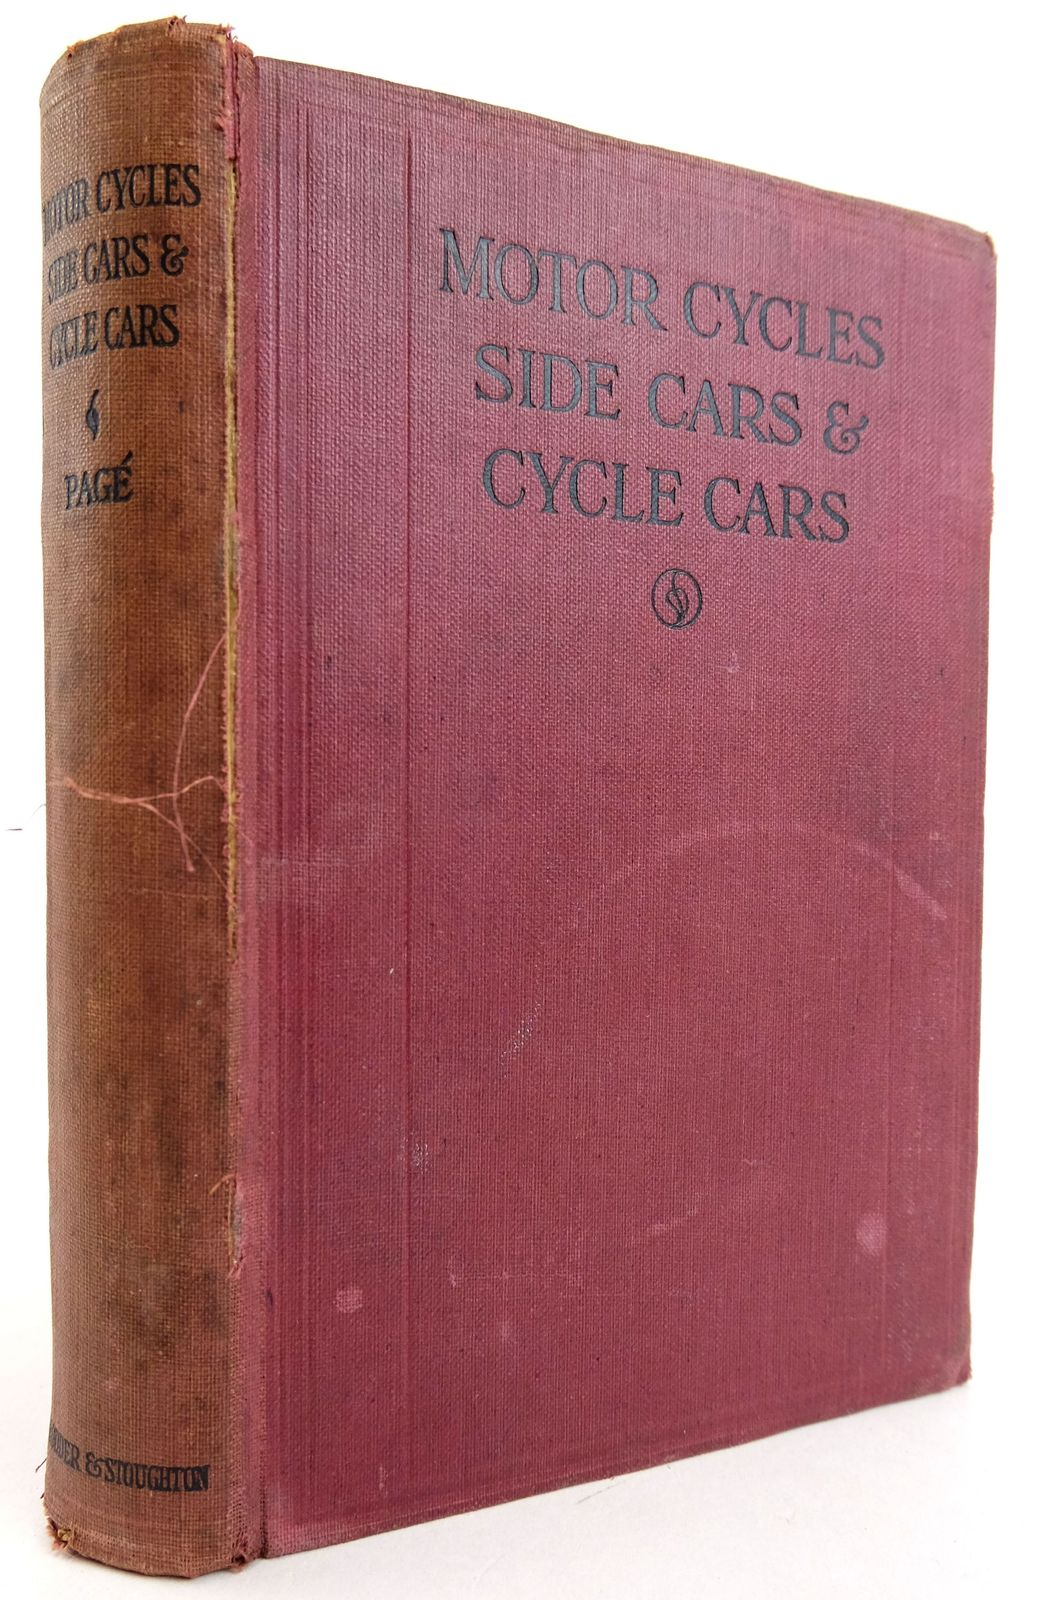 Photo of MOTORCYCLES SIDECARS AND CYCLECARS: CONSTRUCTION, MANAGEMENT, REPAIR- Stock Number: 1819457